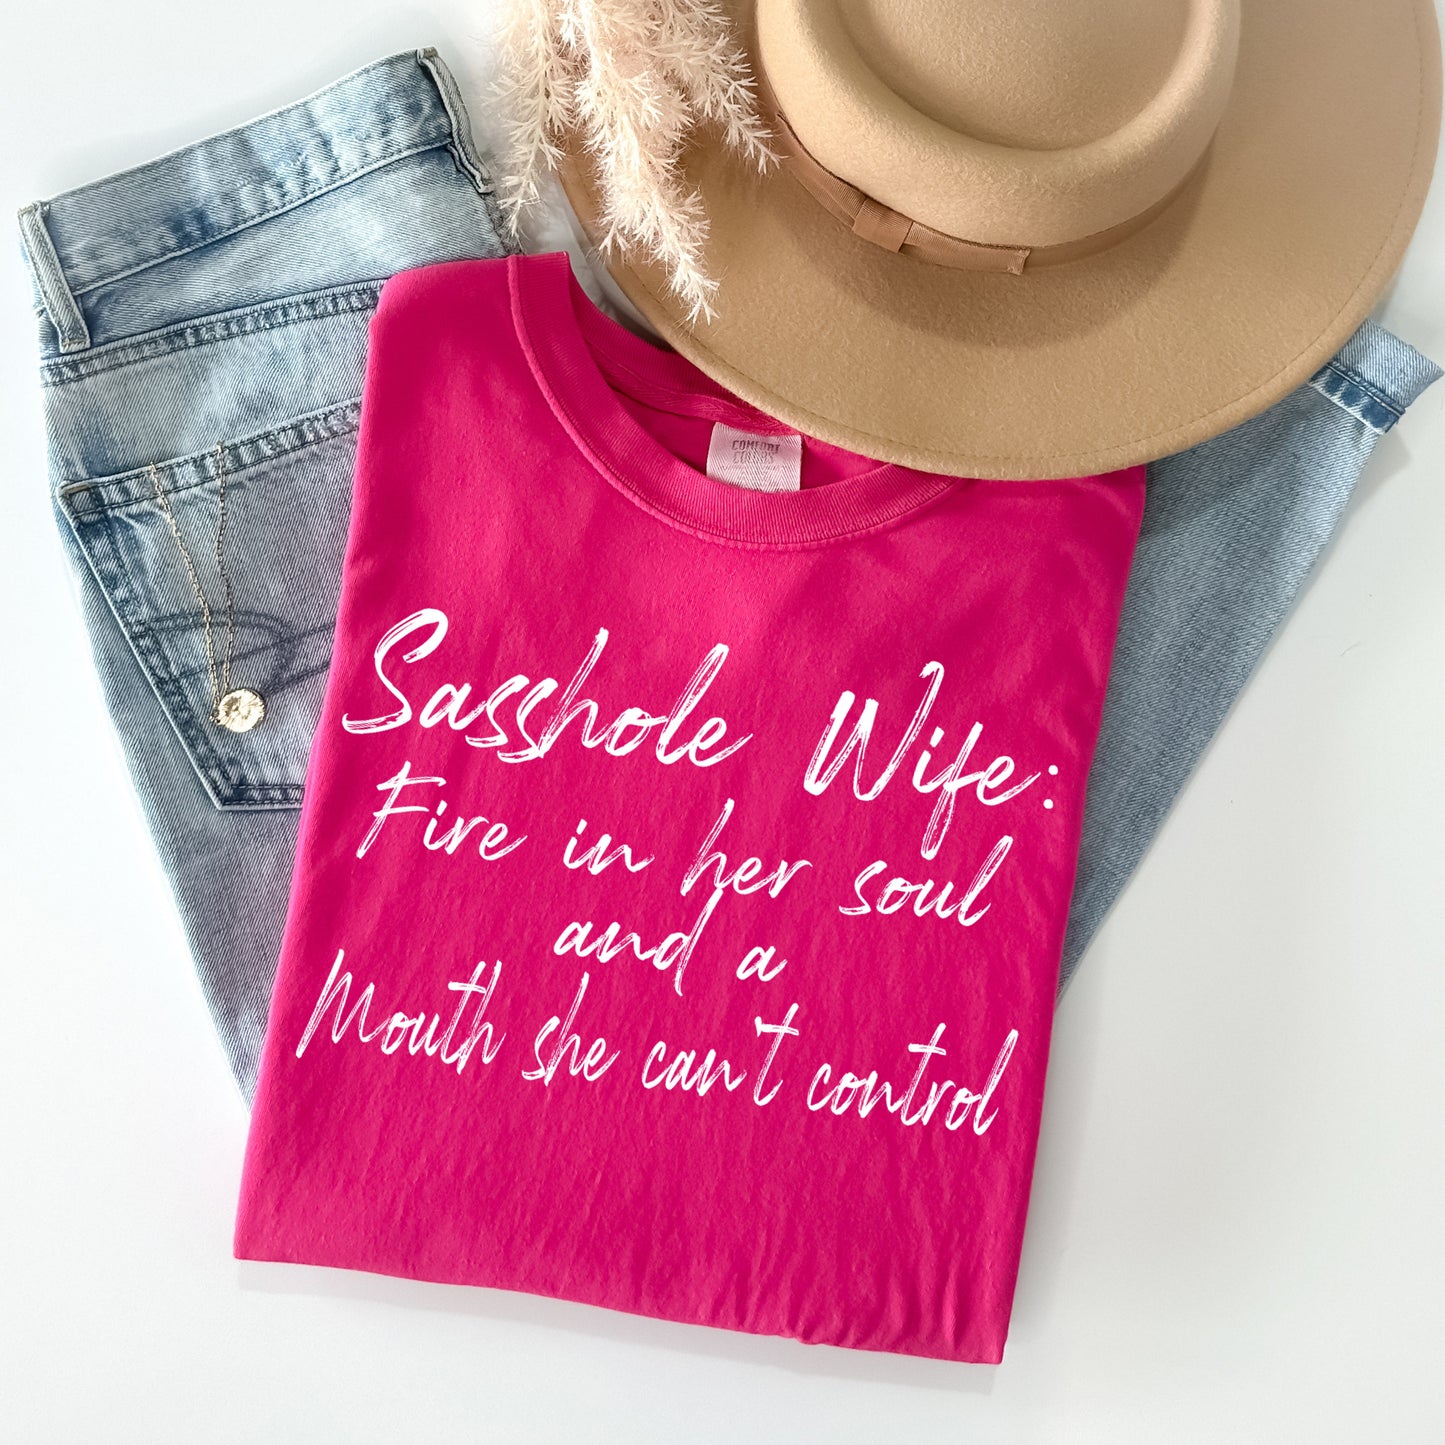 Sasshole Wife: Fire in Her Soul and a Mouth She Can't Control Graphic Tee